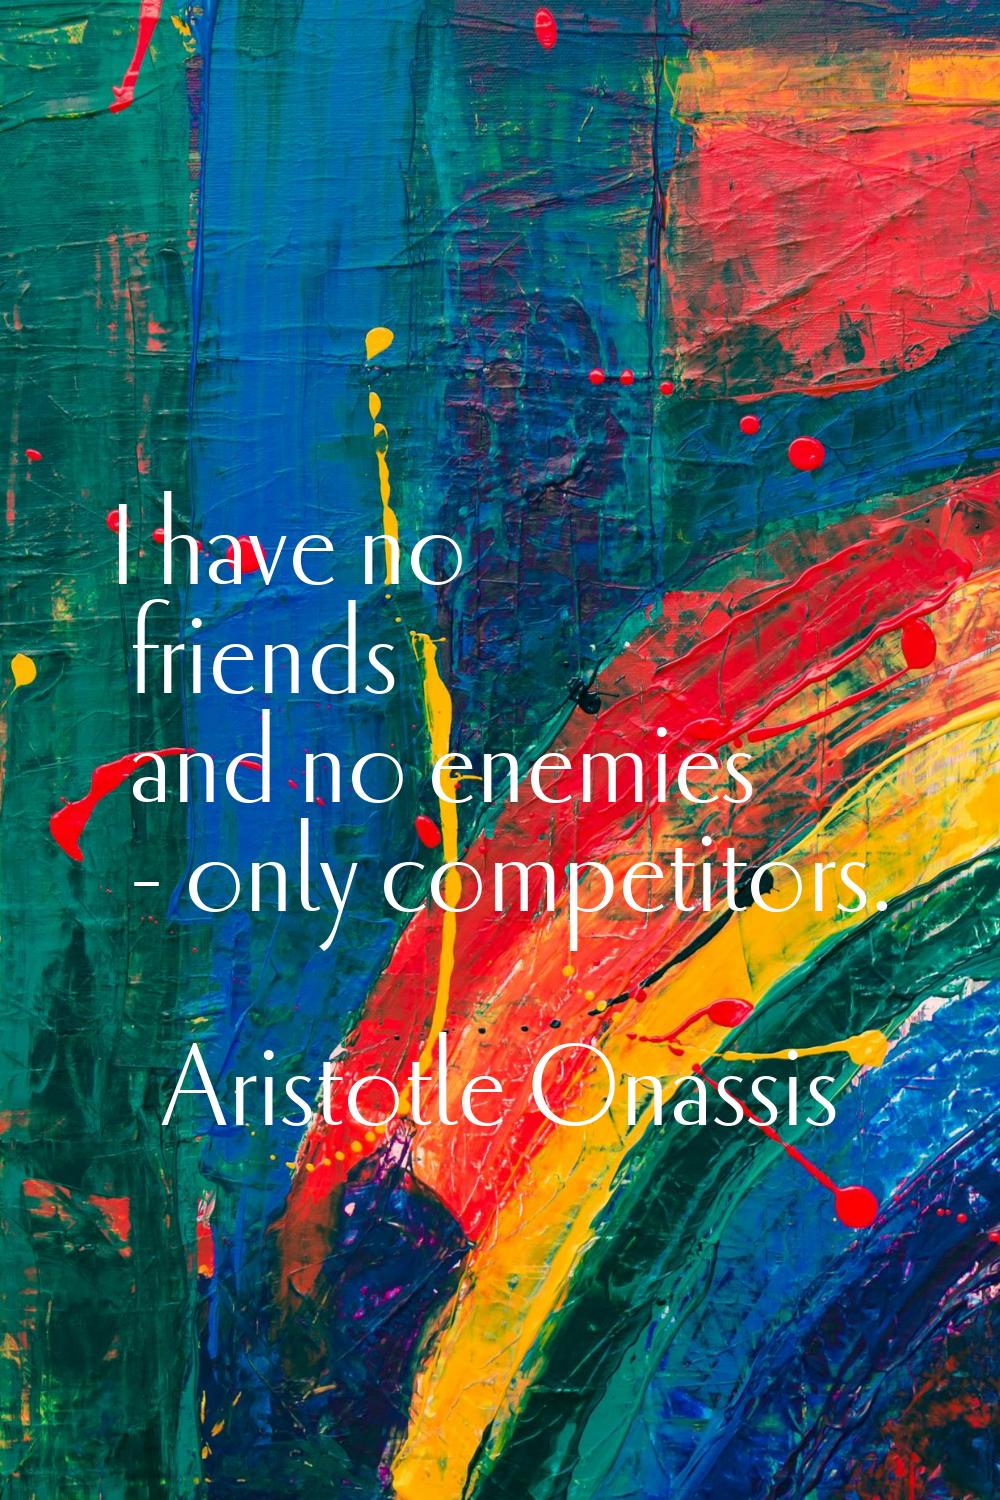 I have no friends and no enemies - only competitors.